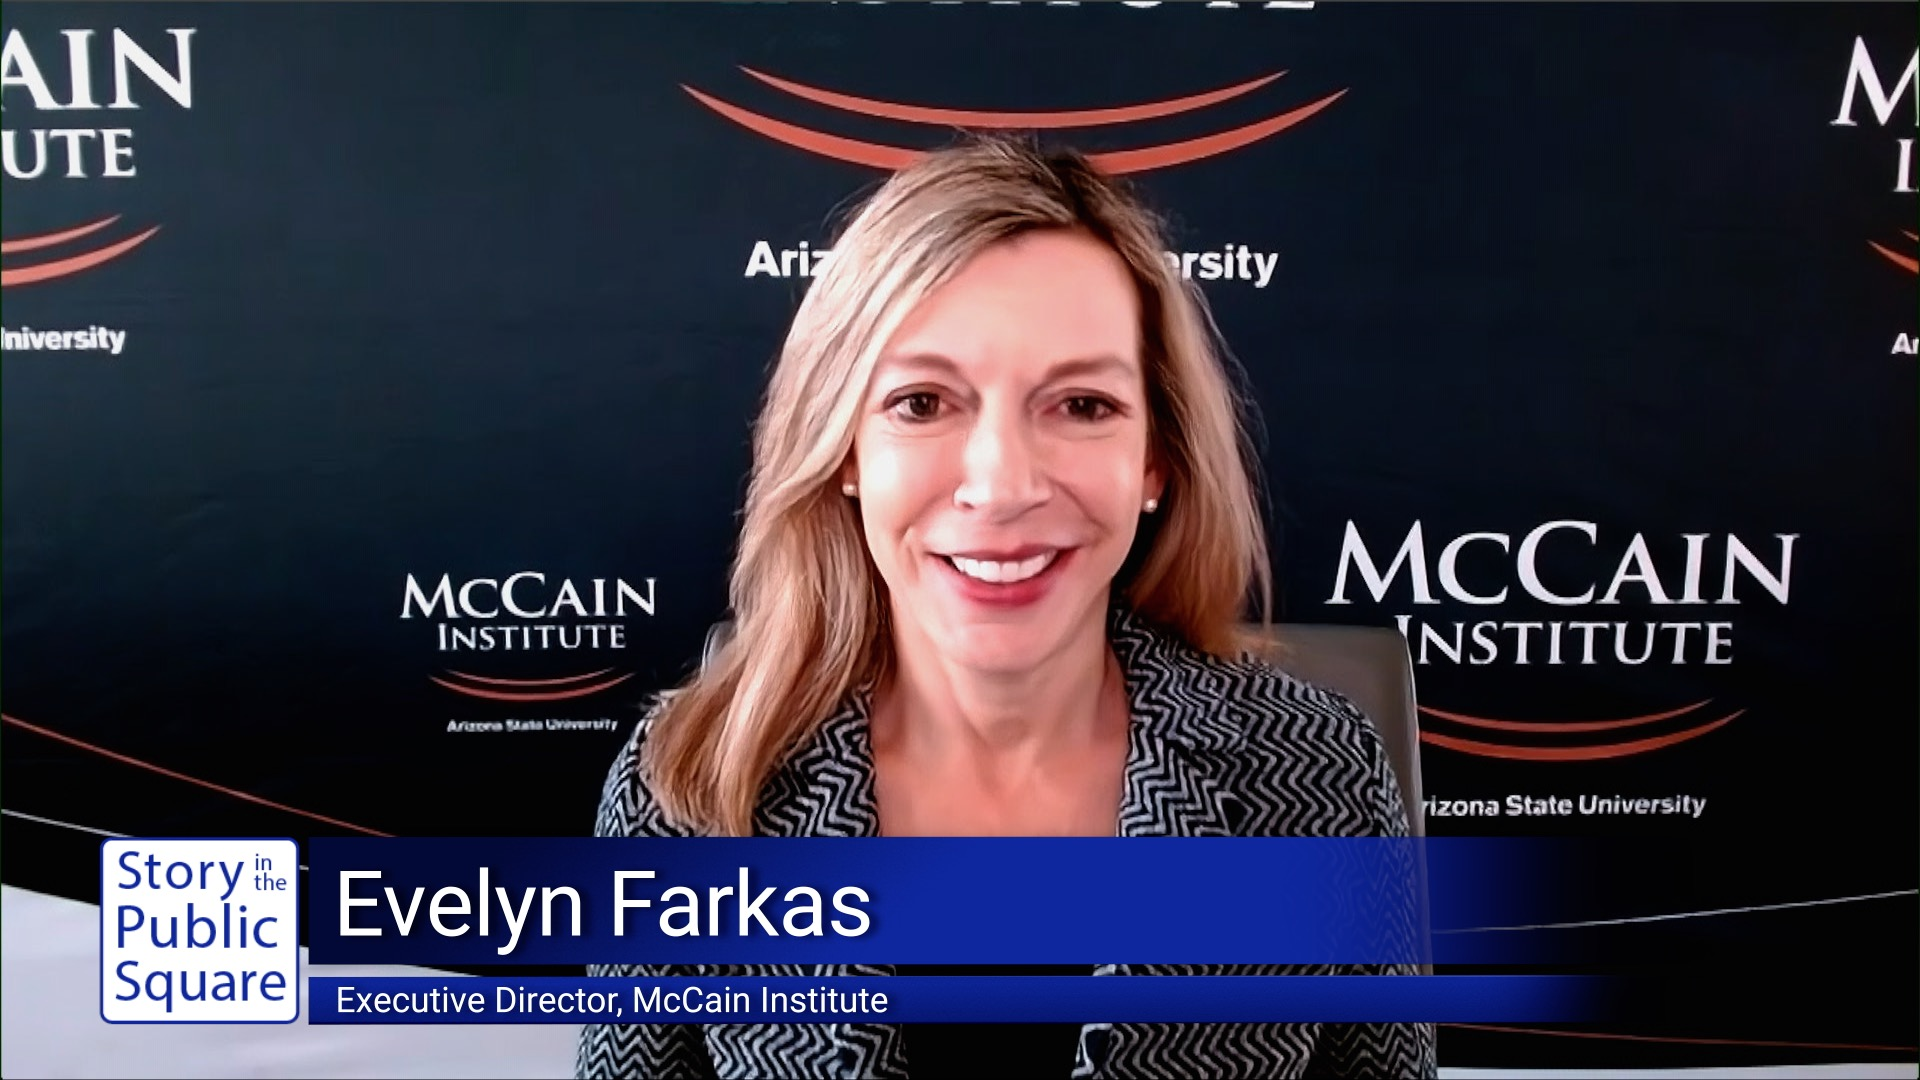 The 2023 Story of the Year: The Rise of Artificial Intelligence with Evelyn Farkas